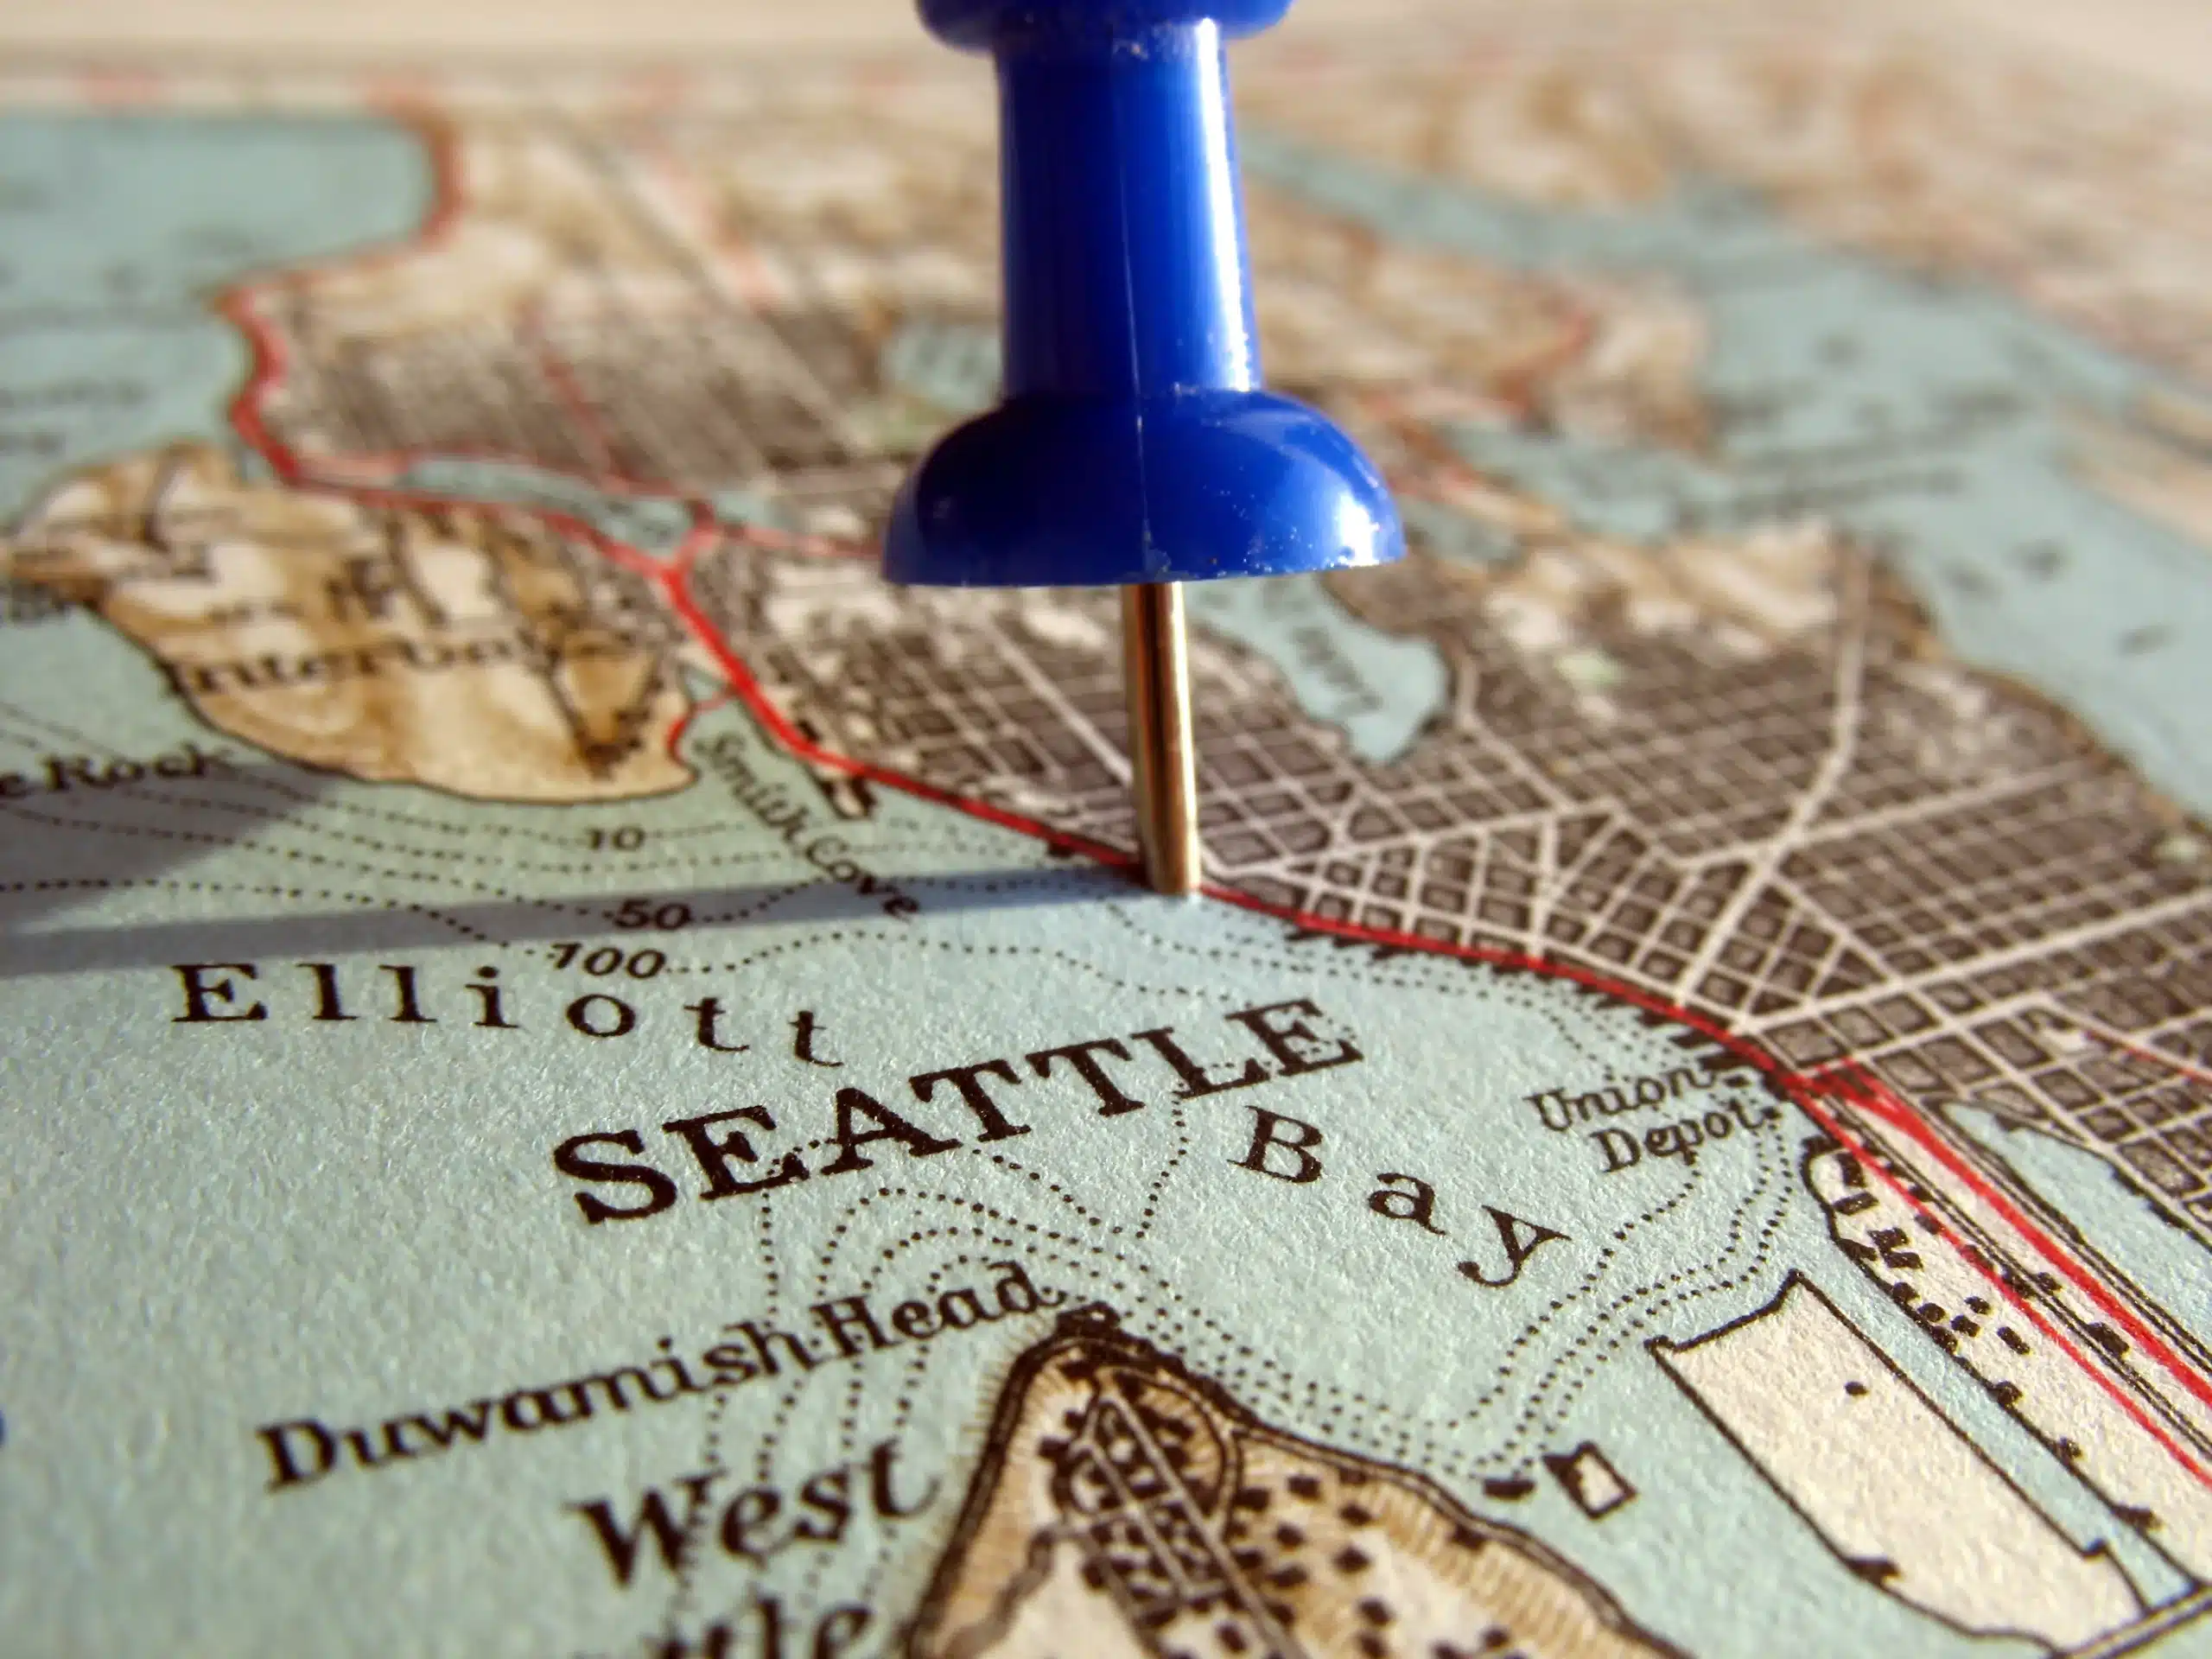 Where Is Seattle Located?